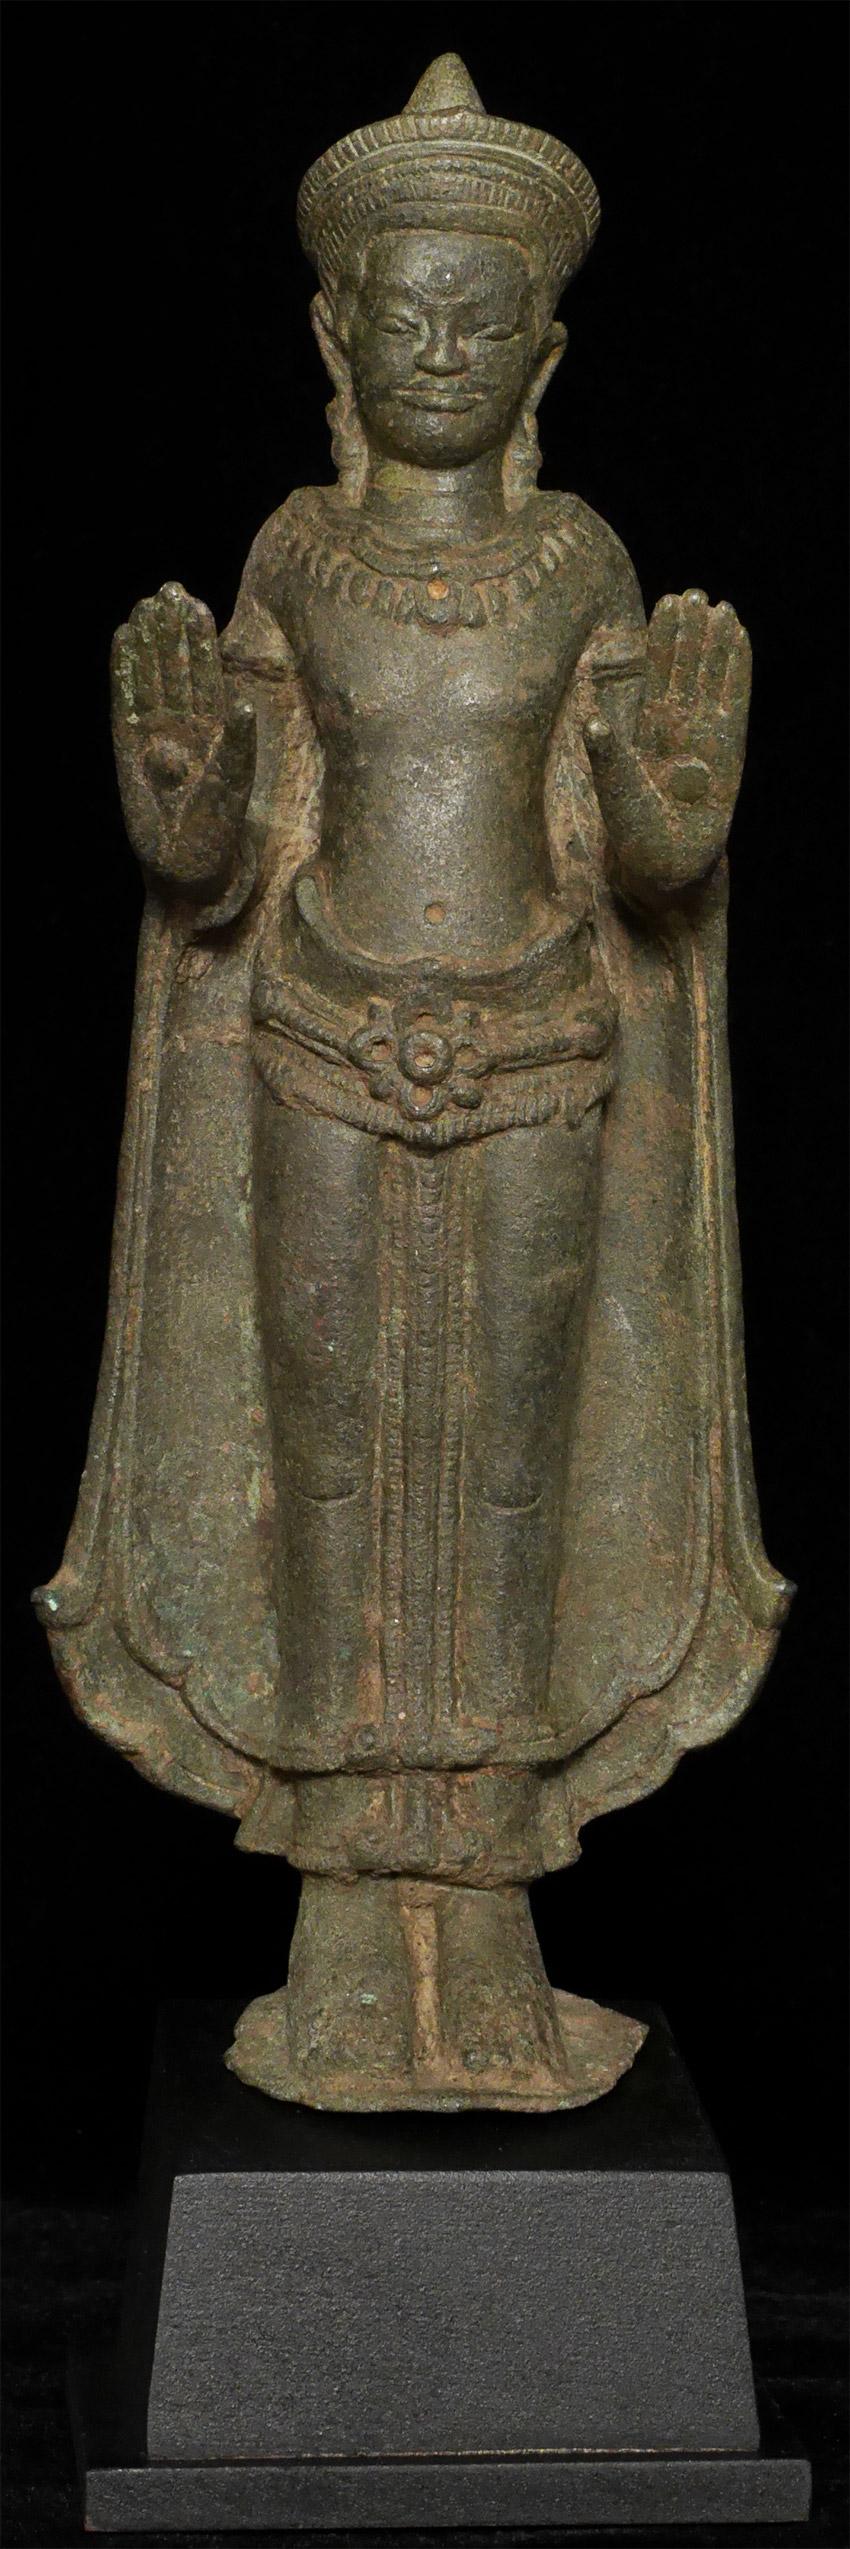 Solid-cast 12/13thC Cambodian bronze Buddha. Expectable wear, but no losses or repairs. Beautiful even untouched patina.  Good size at over 8.5 inches tall, 10.25 inches on the custom base. Solid cast and quite heavy for its size. There are a lot of